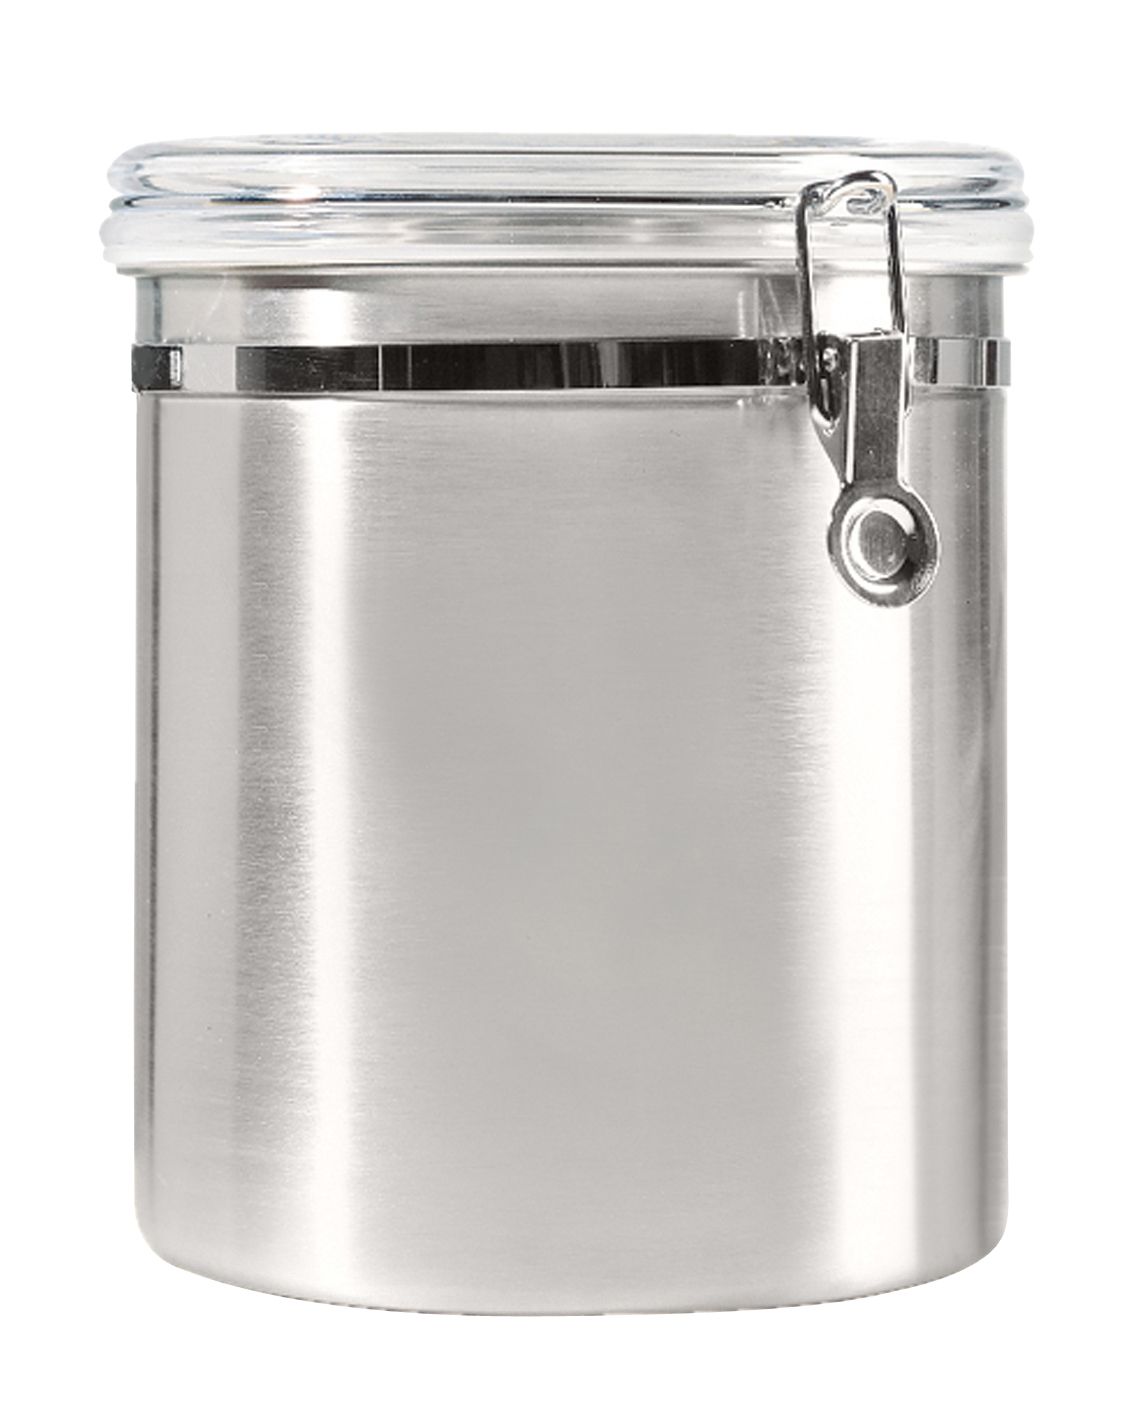 OGGI 4 piece Stainless Steel Airtight Canisters - Kitchen & Company